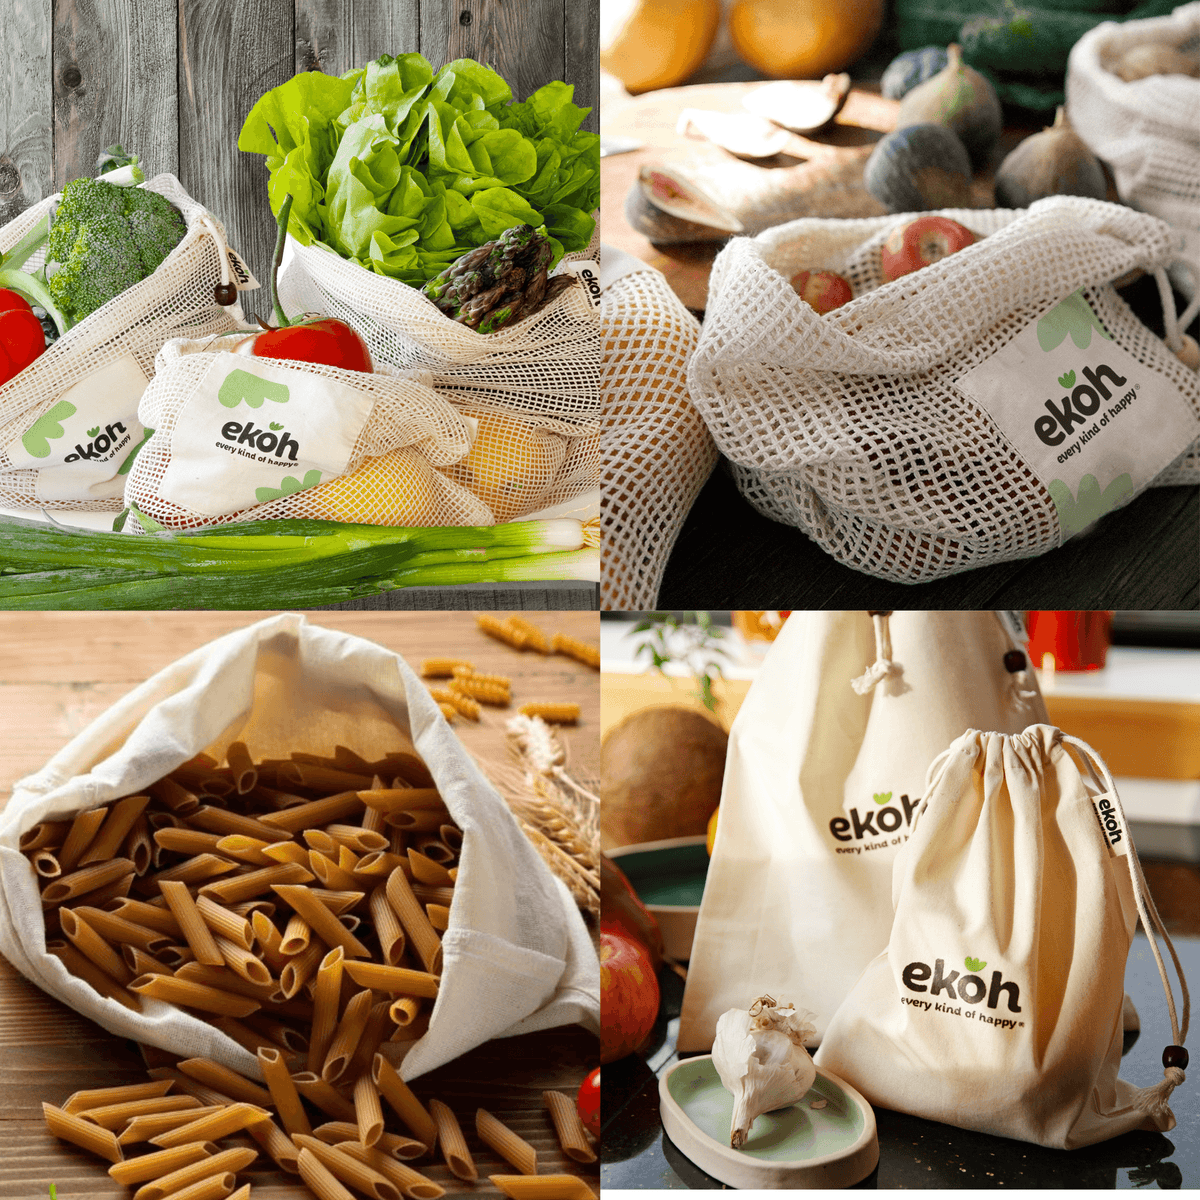 Reusable Fruit and Veggie Produce Bags proven to keep produce fresh for longer.